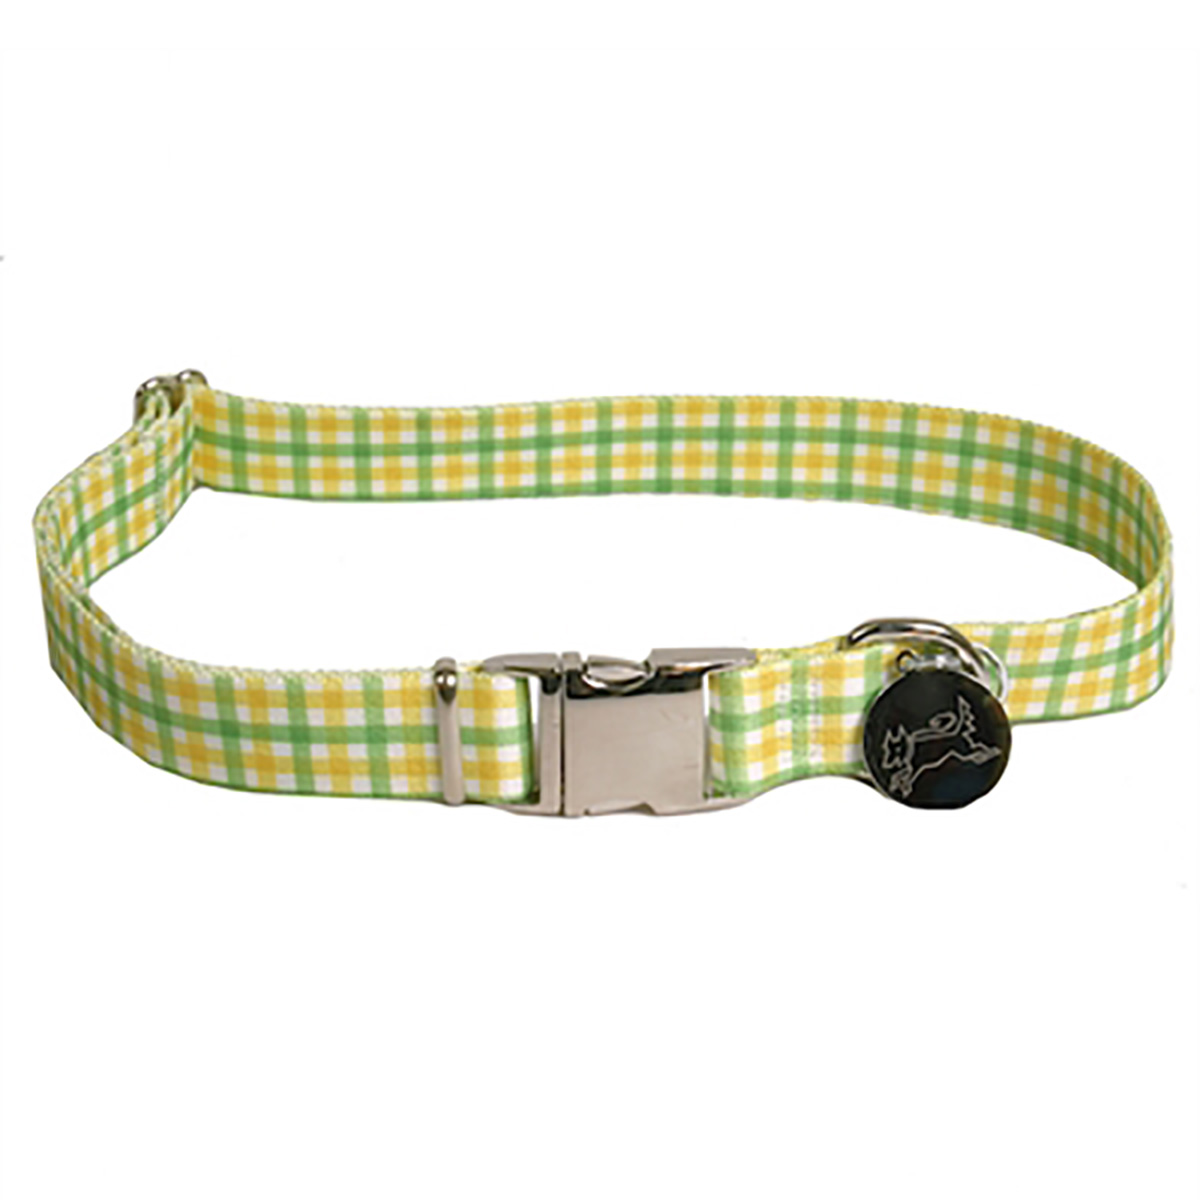 Southern Dawg Gingham Dog Collar by Yellow Dog - Yellow and Green